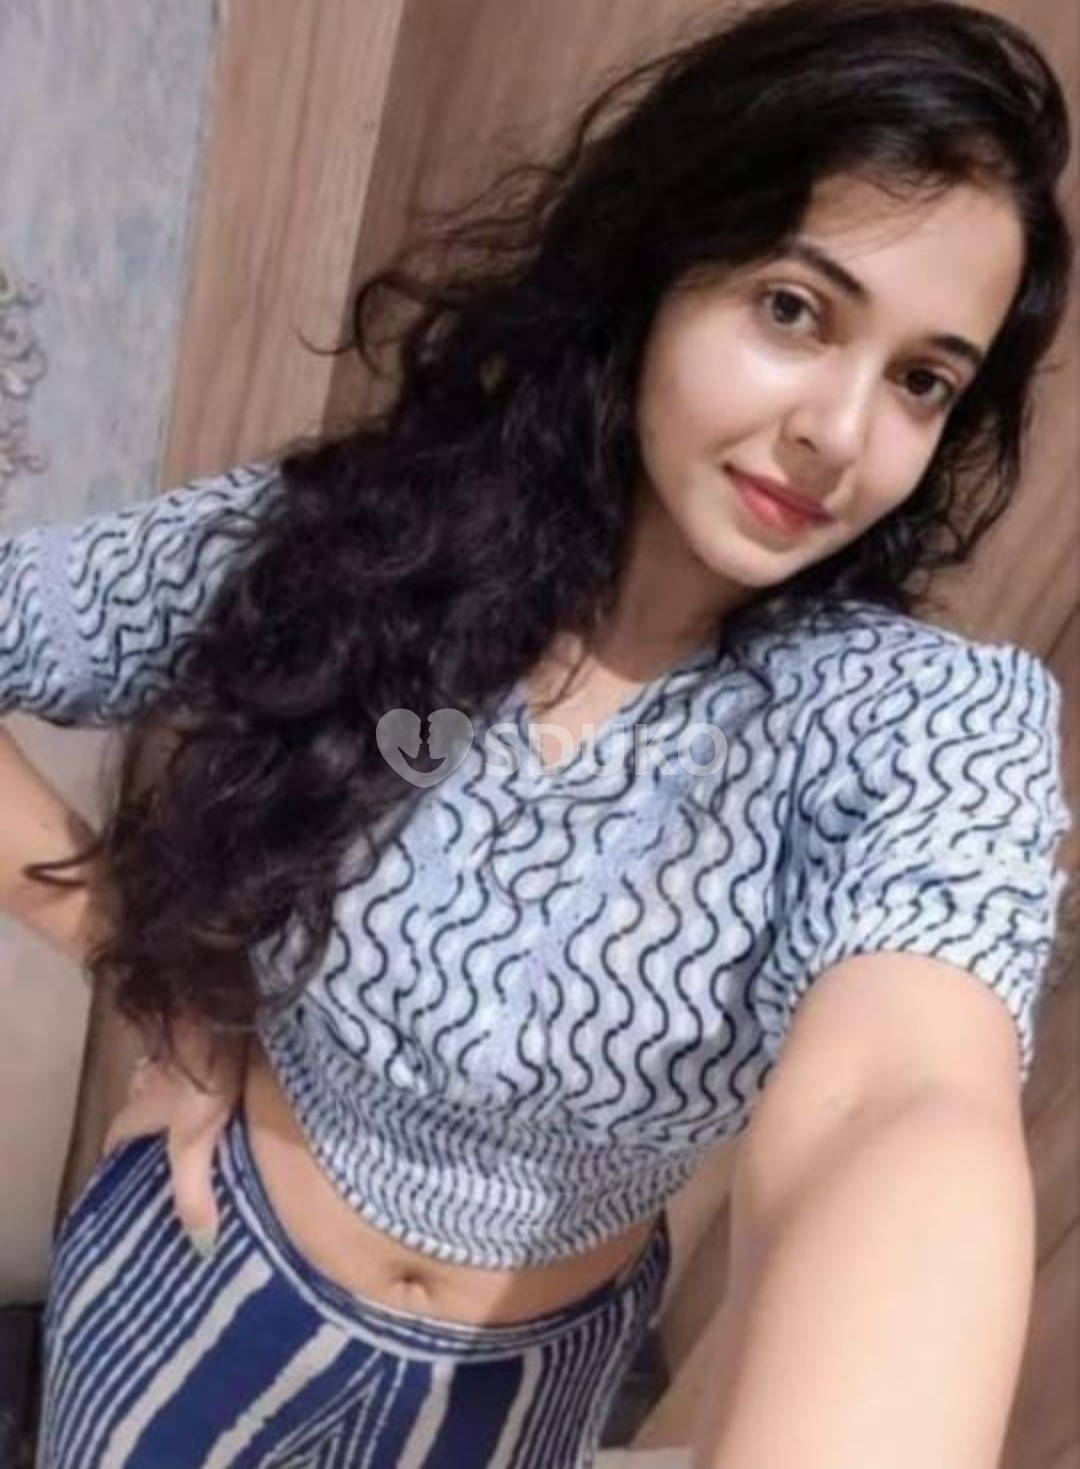 Greater Noida LOW PRICE🔸c✅( 24×7 ) SERVICE A AVAILABLE 100% SAFE AND S SECURE UNLIMITED ENJOY HOT COLLEGE GIRL HOU